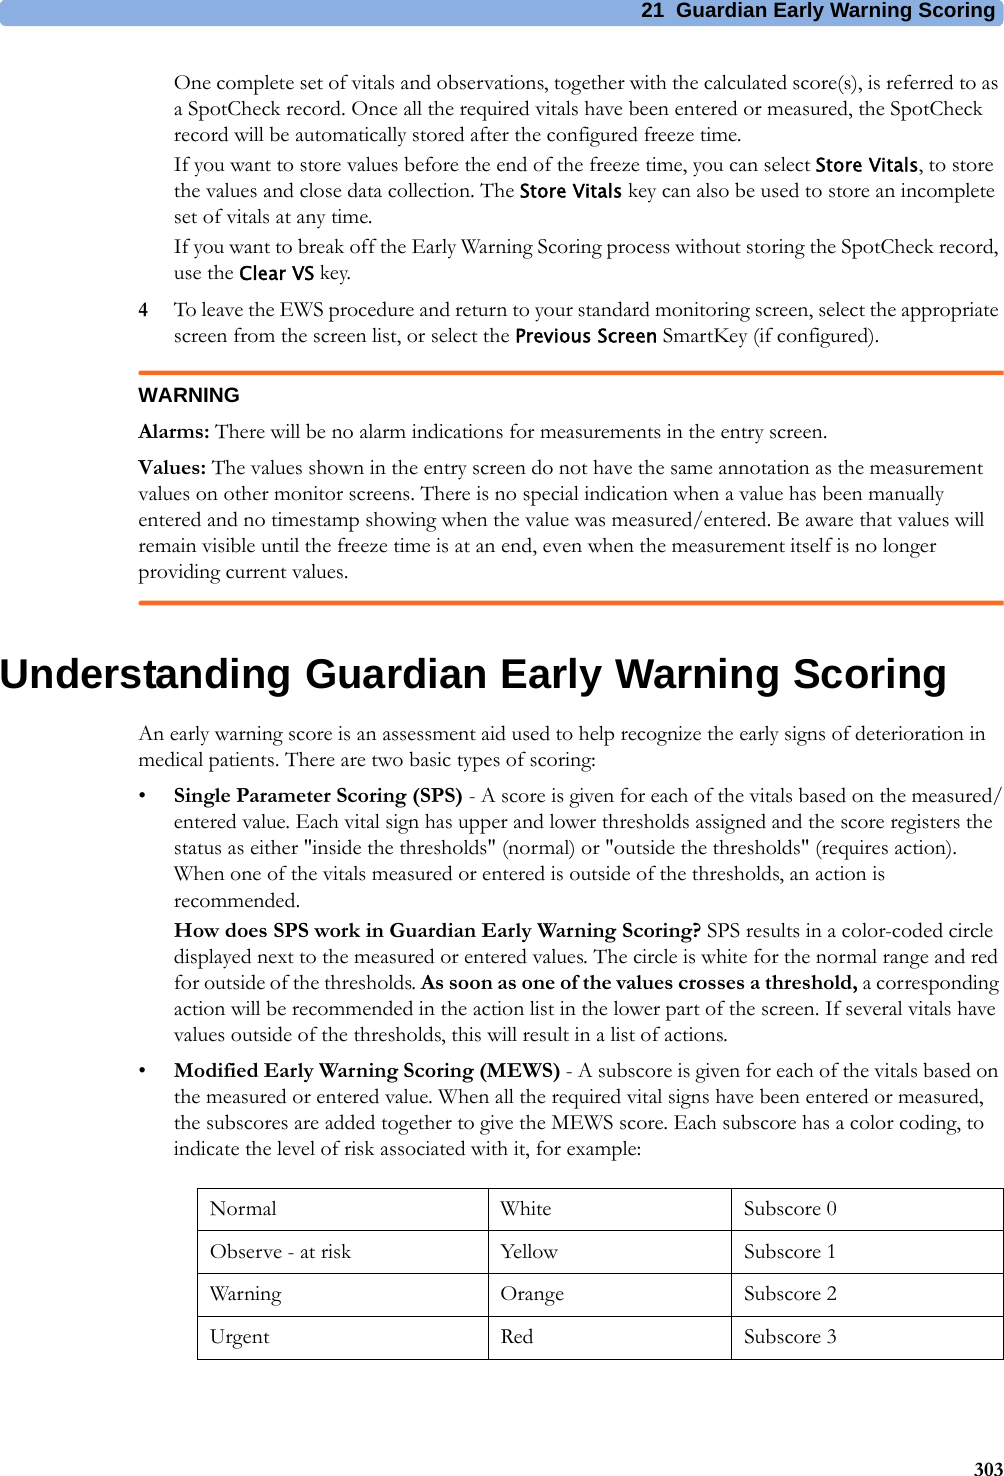 21 Guardian Early Warning Scoring303One complete set of vitals and observations, together with the calculated score(s), is referred to as a SpotCheck record. Once all the required vitals have been entered or measured, the SpotCheck record will be automatically stored after the configured freeze time.If you want to store values before the end of the freeze time, you can select Store Vitals, to store the values and close data collection. The Store Vitals key can also be used to store an incomplete set of vitals at any time.If you want to break off the Early Warning Scoring process without storing the SpotCheck record, use the Clear VS key.4To leave the EWS procedure and return to your standard monitoring screen, select the appropriate screen from the screen list, or select the Previous Screen SmartKey (if configured).WARNINGAlarms: There will be no alarm indications for measurements in the entry screen. Values: The values shown in the entry screen do not have the same annotation as the measurement values on other monitor screens. There is no special indication when a value has been manually entered and no timestamp showing when the value was measured/entered. Be aware that values will remain visible until the freeze time is at an end, even when the measurement itself is no longer providing current values.Understanding Guardian Early Warning ScoringAn early warning score is an assessment aid used to help recognize the early signs of deterioration in medical patients. There are two basic types of scoring:•Single Parameter Scoring (SPS) - A score is given for each of the vitals based on the measured/entered value. Each vital sign has upper and lower thresholds assigned and the score registers the status as either &quot;inside the thresholds&quot; (normal) or &quot;outside the thresholds&quot; (requires action). When one of the vitals measured or entered is outside of the thresholds, an action is recommended.How does SPS work in Guardian Early Warning Scoring? SPS results in a color-coded circle displayed next to the measured or entered values. The circle is white for the normal range and red for outside of the thresholds. As soon as one of the values crosses a threshold, a corresponding action will be recommended in the action list in the lower part of the screen. If several vitals have values outside of the thresholds, this will result in a list of actions.•Modified Early Warning Scoring (MEWS) - A subscore is given for each of the vitals based on the measured or entered value. When all the required vital signs have been entered or measured, the subscores are added together to give the MEWS score. Each subscore has a color coding, to indicate the level of risk associated with it, for example:Normal White Subscore 0Observe - at risk Yellow Subscore 1Warning Orange Subscore 2Urgent Red Subscore 3